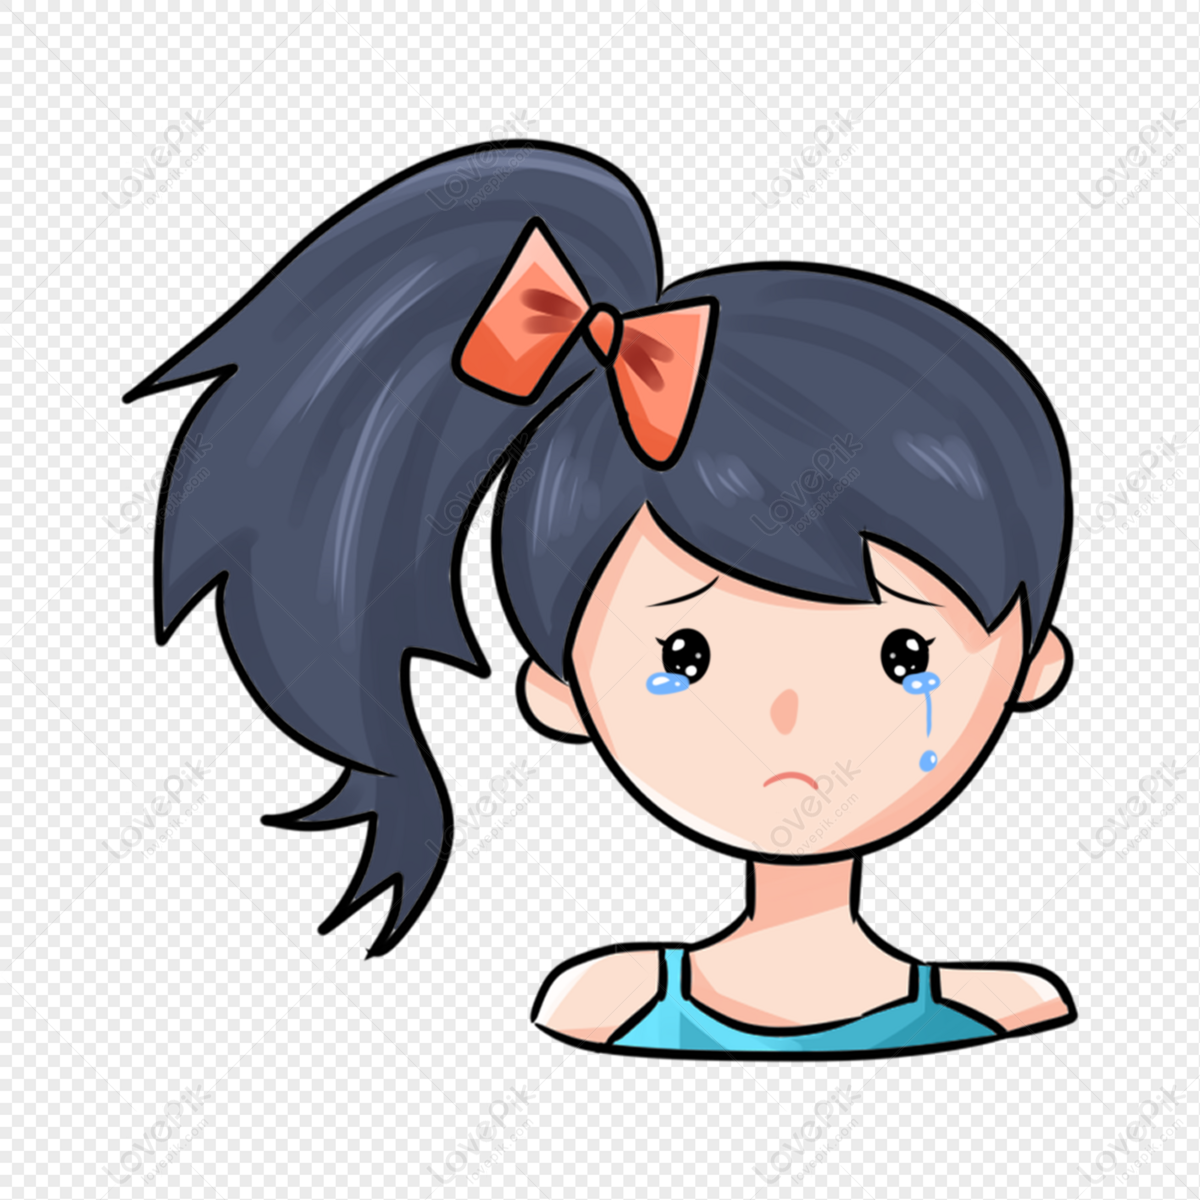 Cartoon Girl Sad Expression Illustration Free PNG And Clipart Image For  Free Download - Lovepik | 401263469